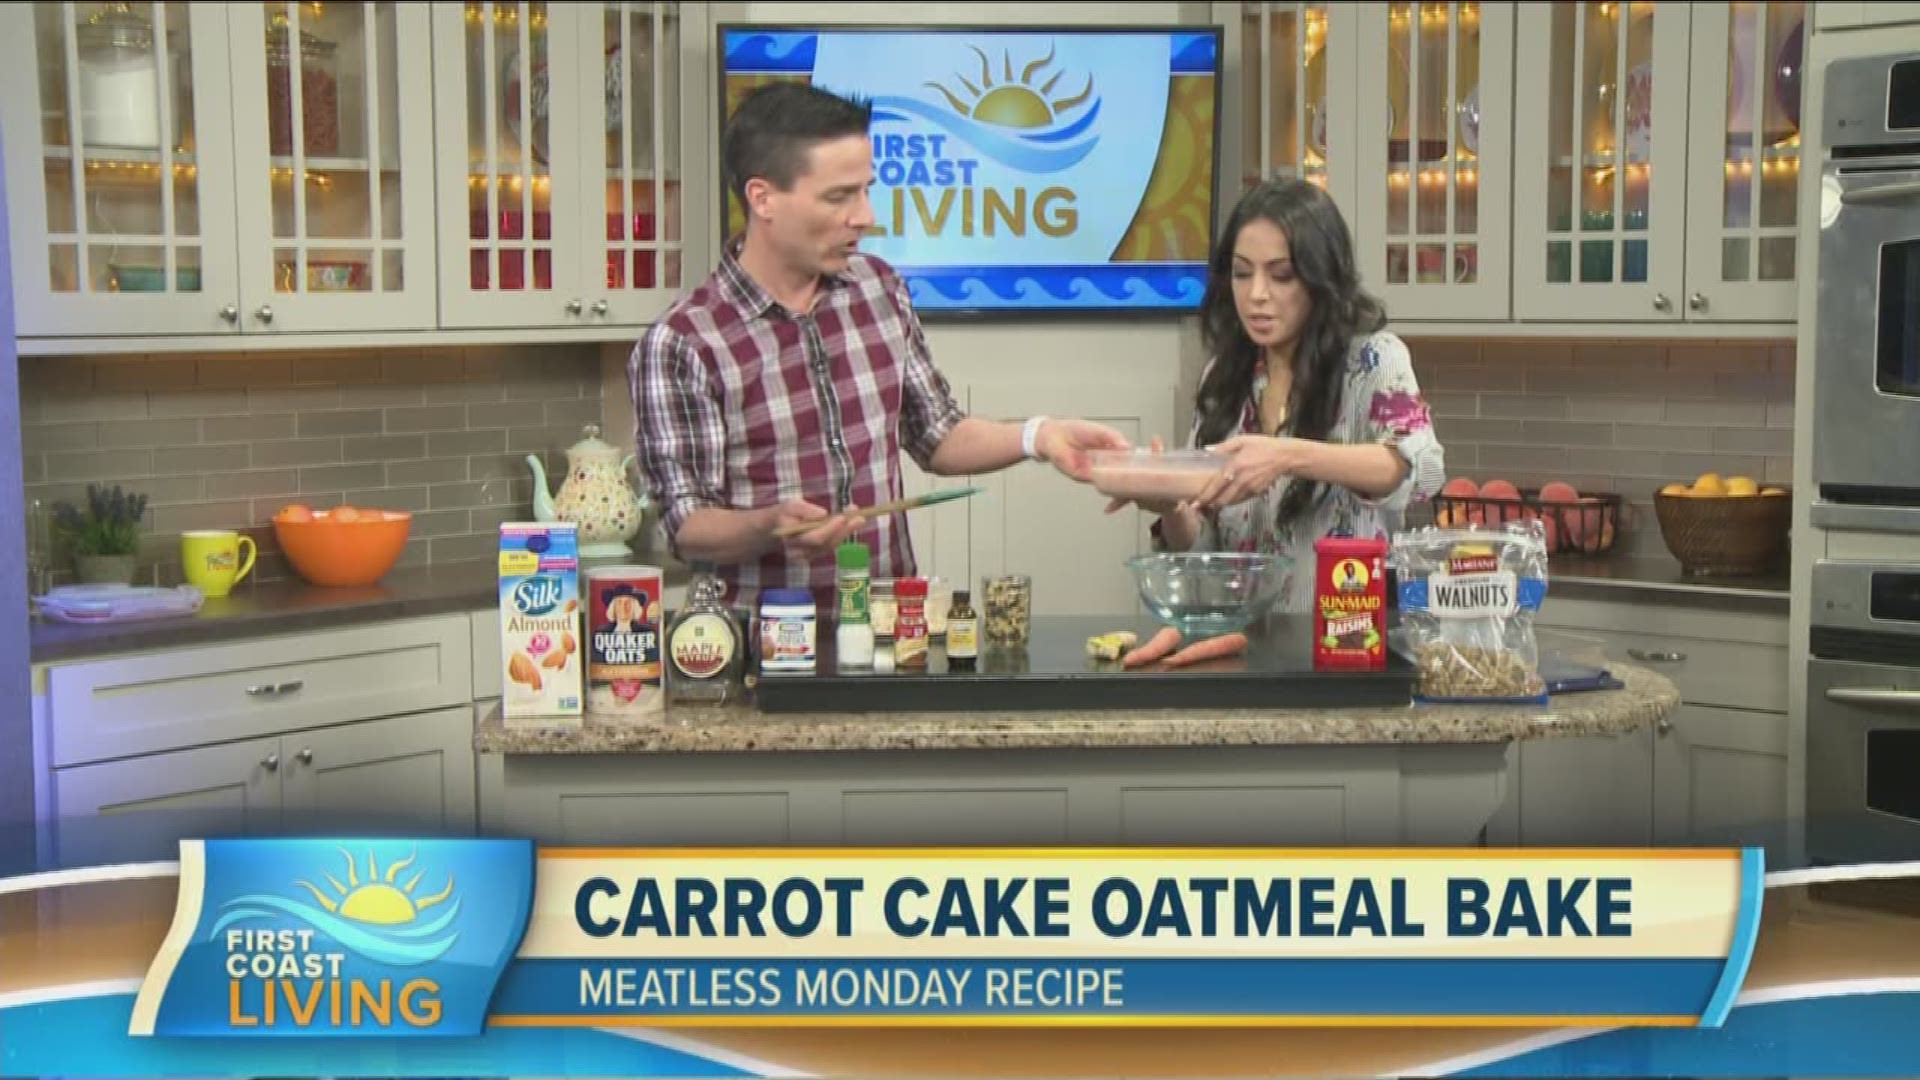 Curtis Dvorak and Haddie Djemal whip up a delicious dish and give you the recipe for Carrot Cake Oatmeal Bake on Meatless Monday.